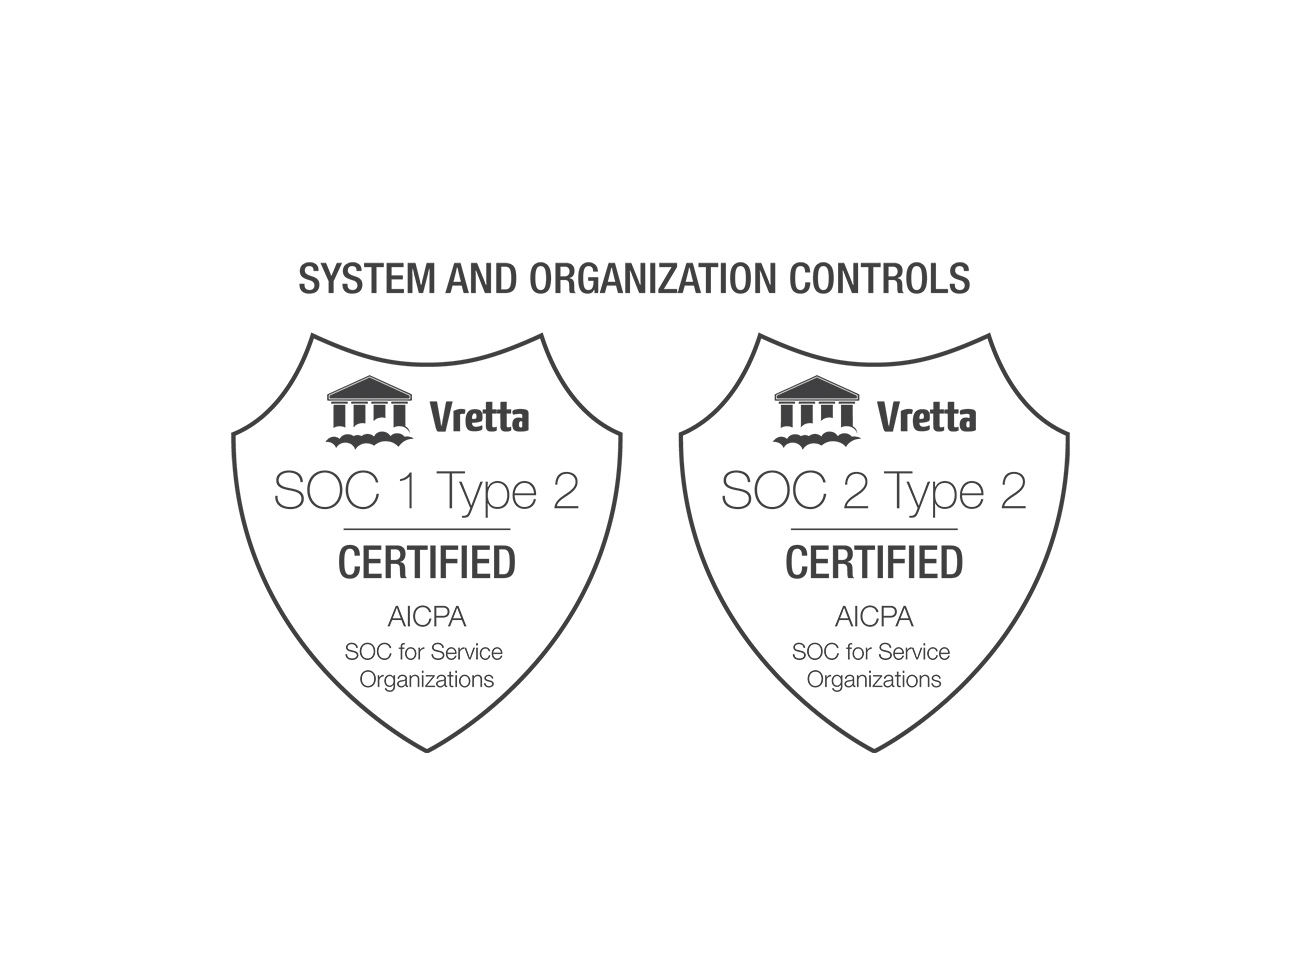 Vretta Achieves System and Organization Controls (SOC) Security Compliance Standards